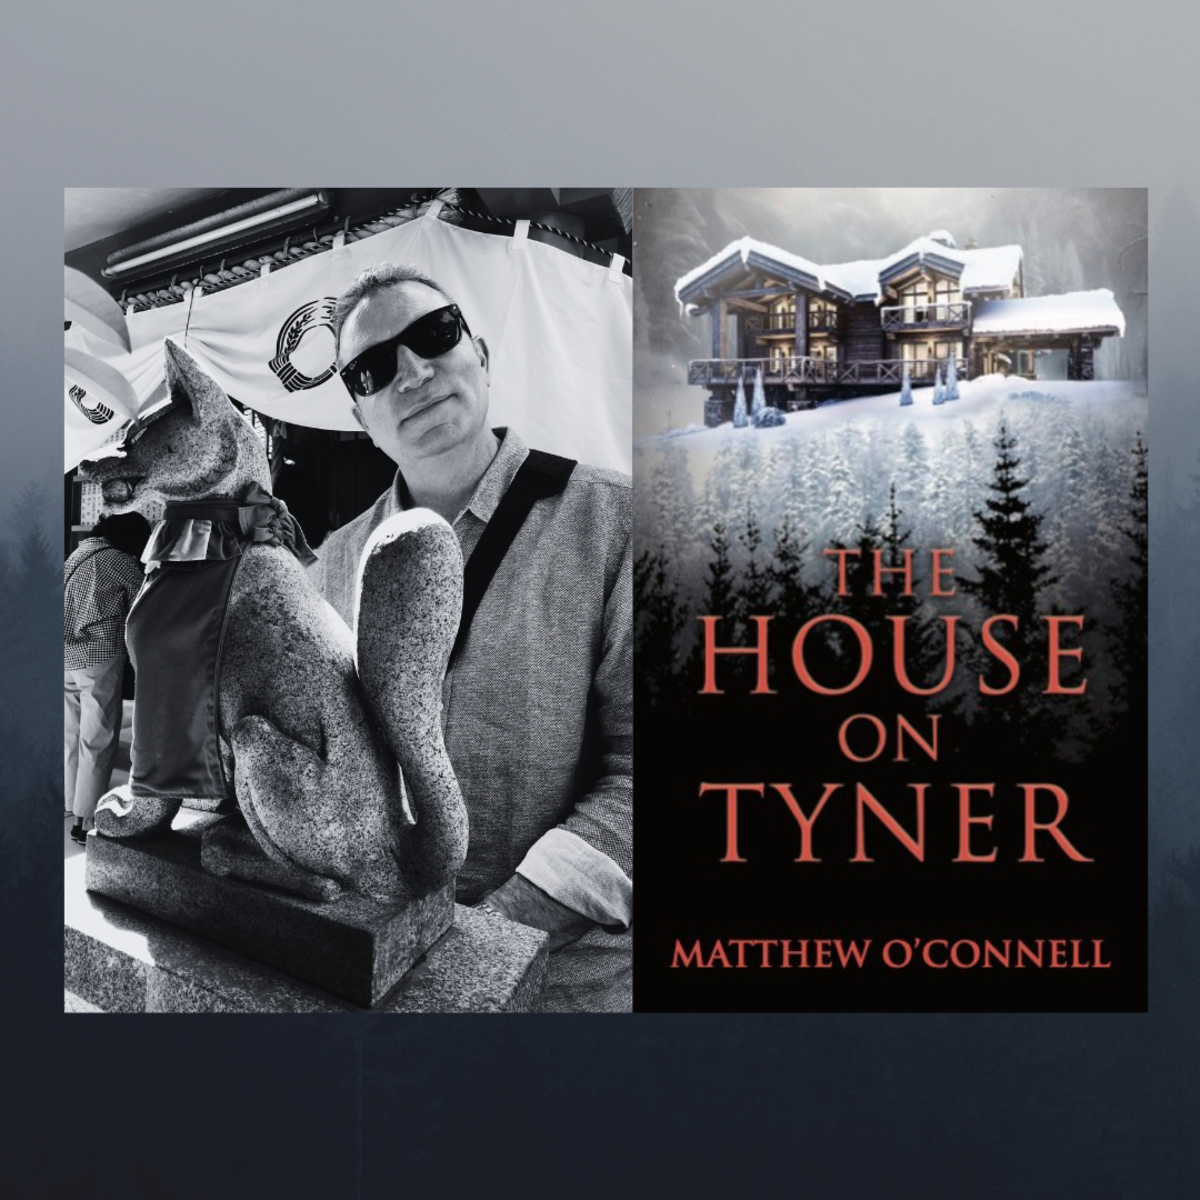 Interview With Author Matthew O'Connell: The House on Tyner